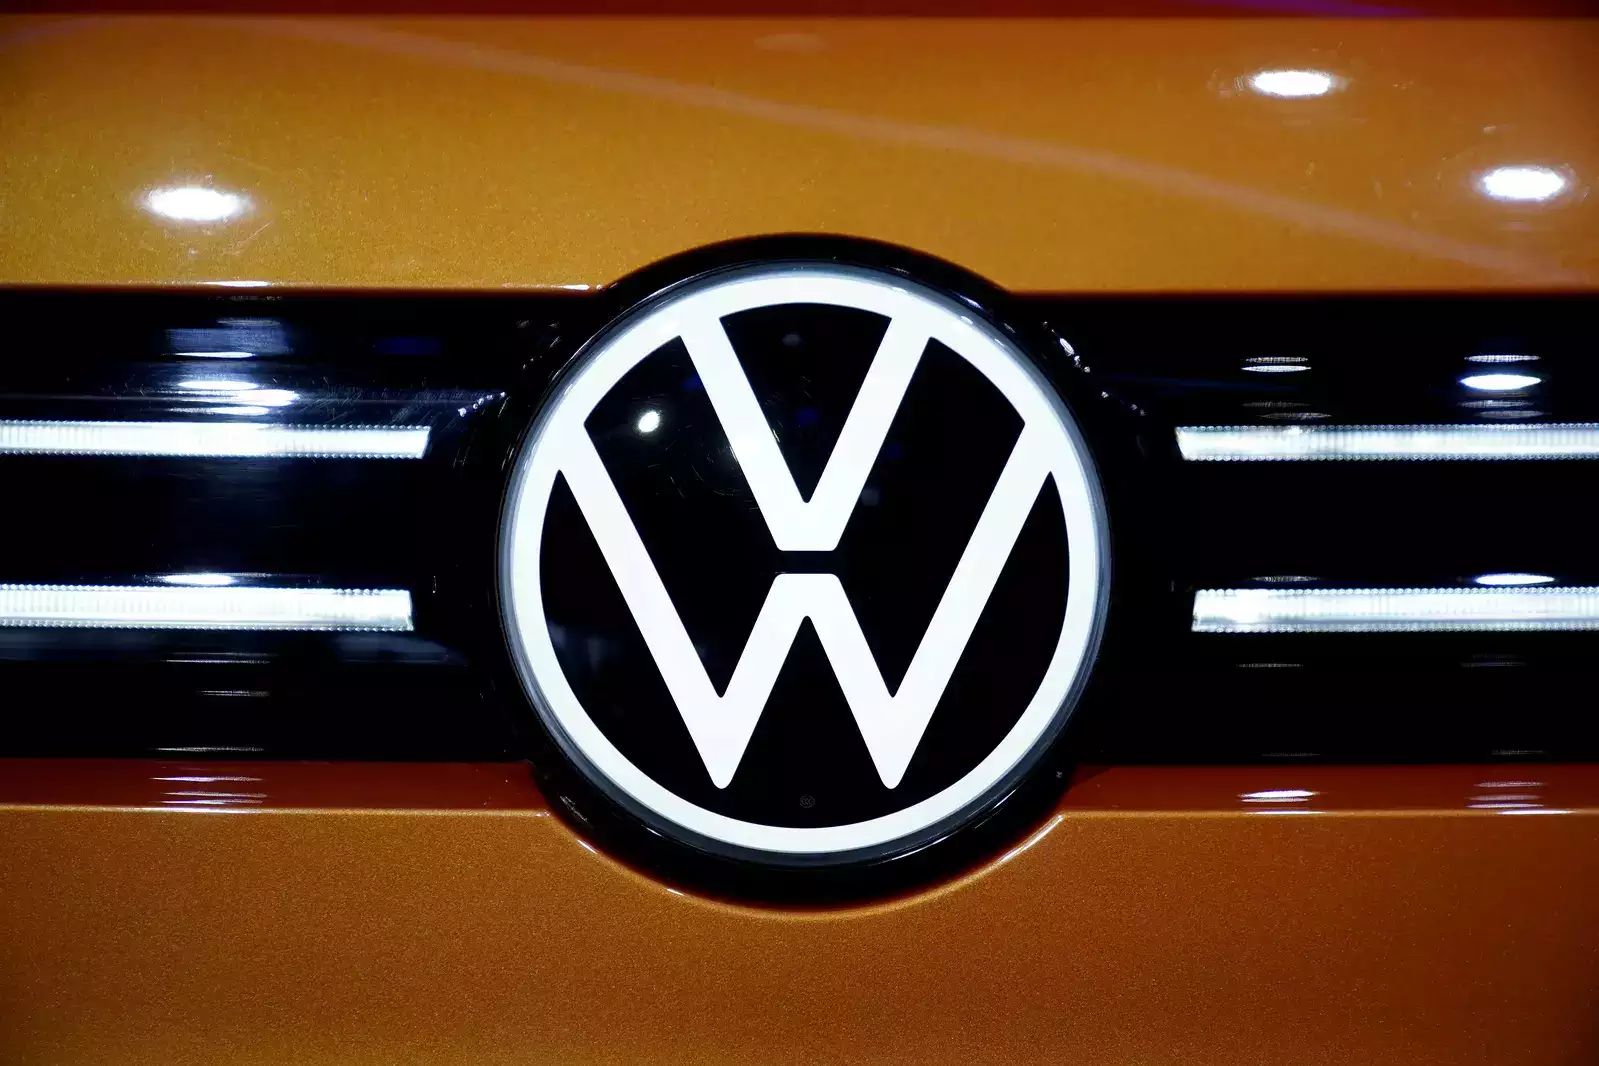 VW aims to produce 3 mln small EV cars in 2025-2030 in Spain, SEAT